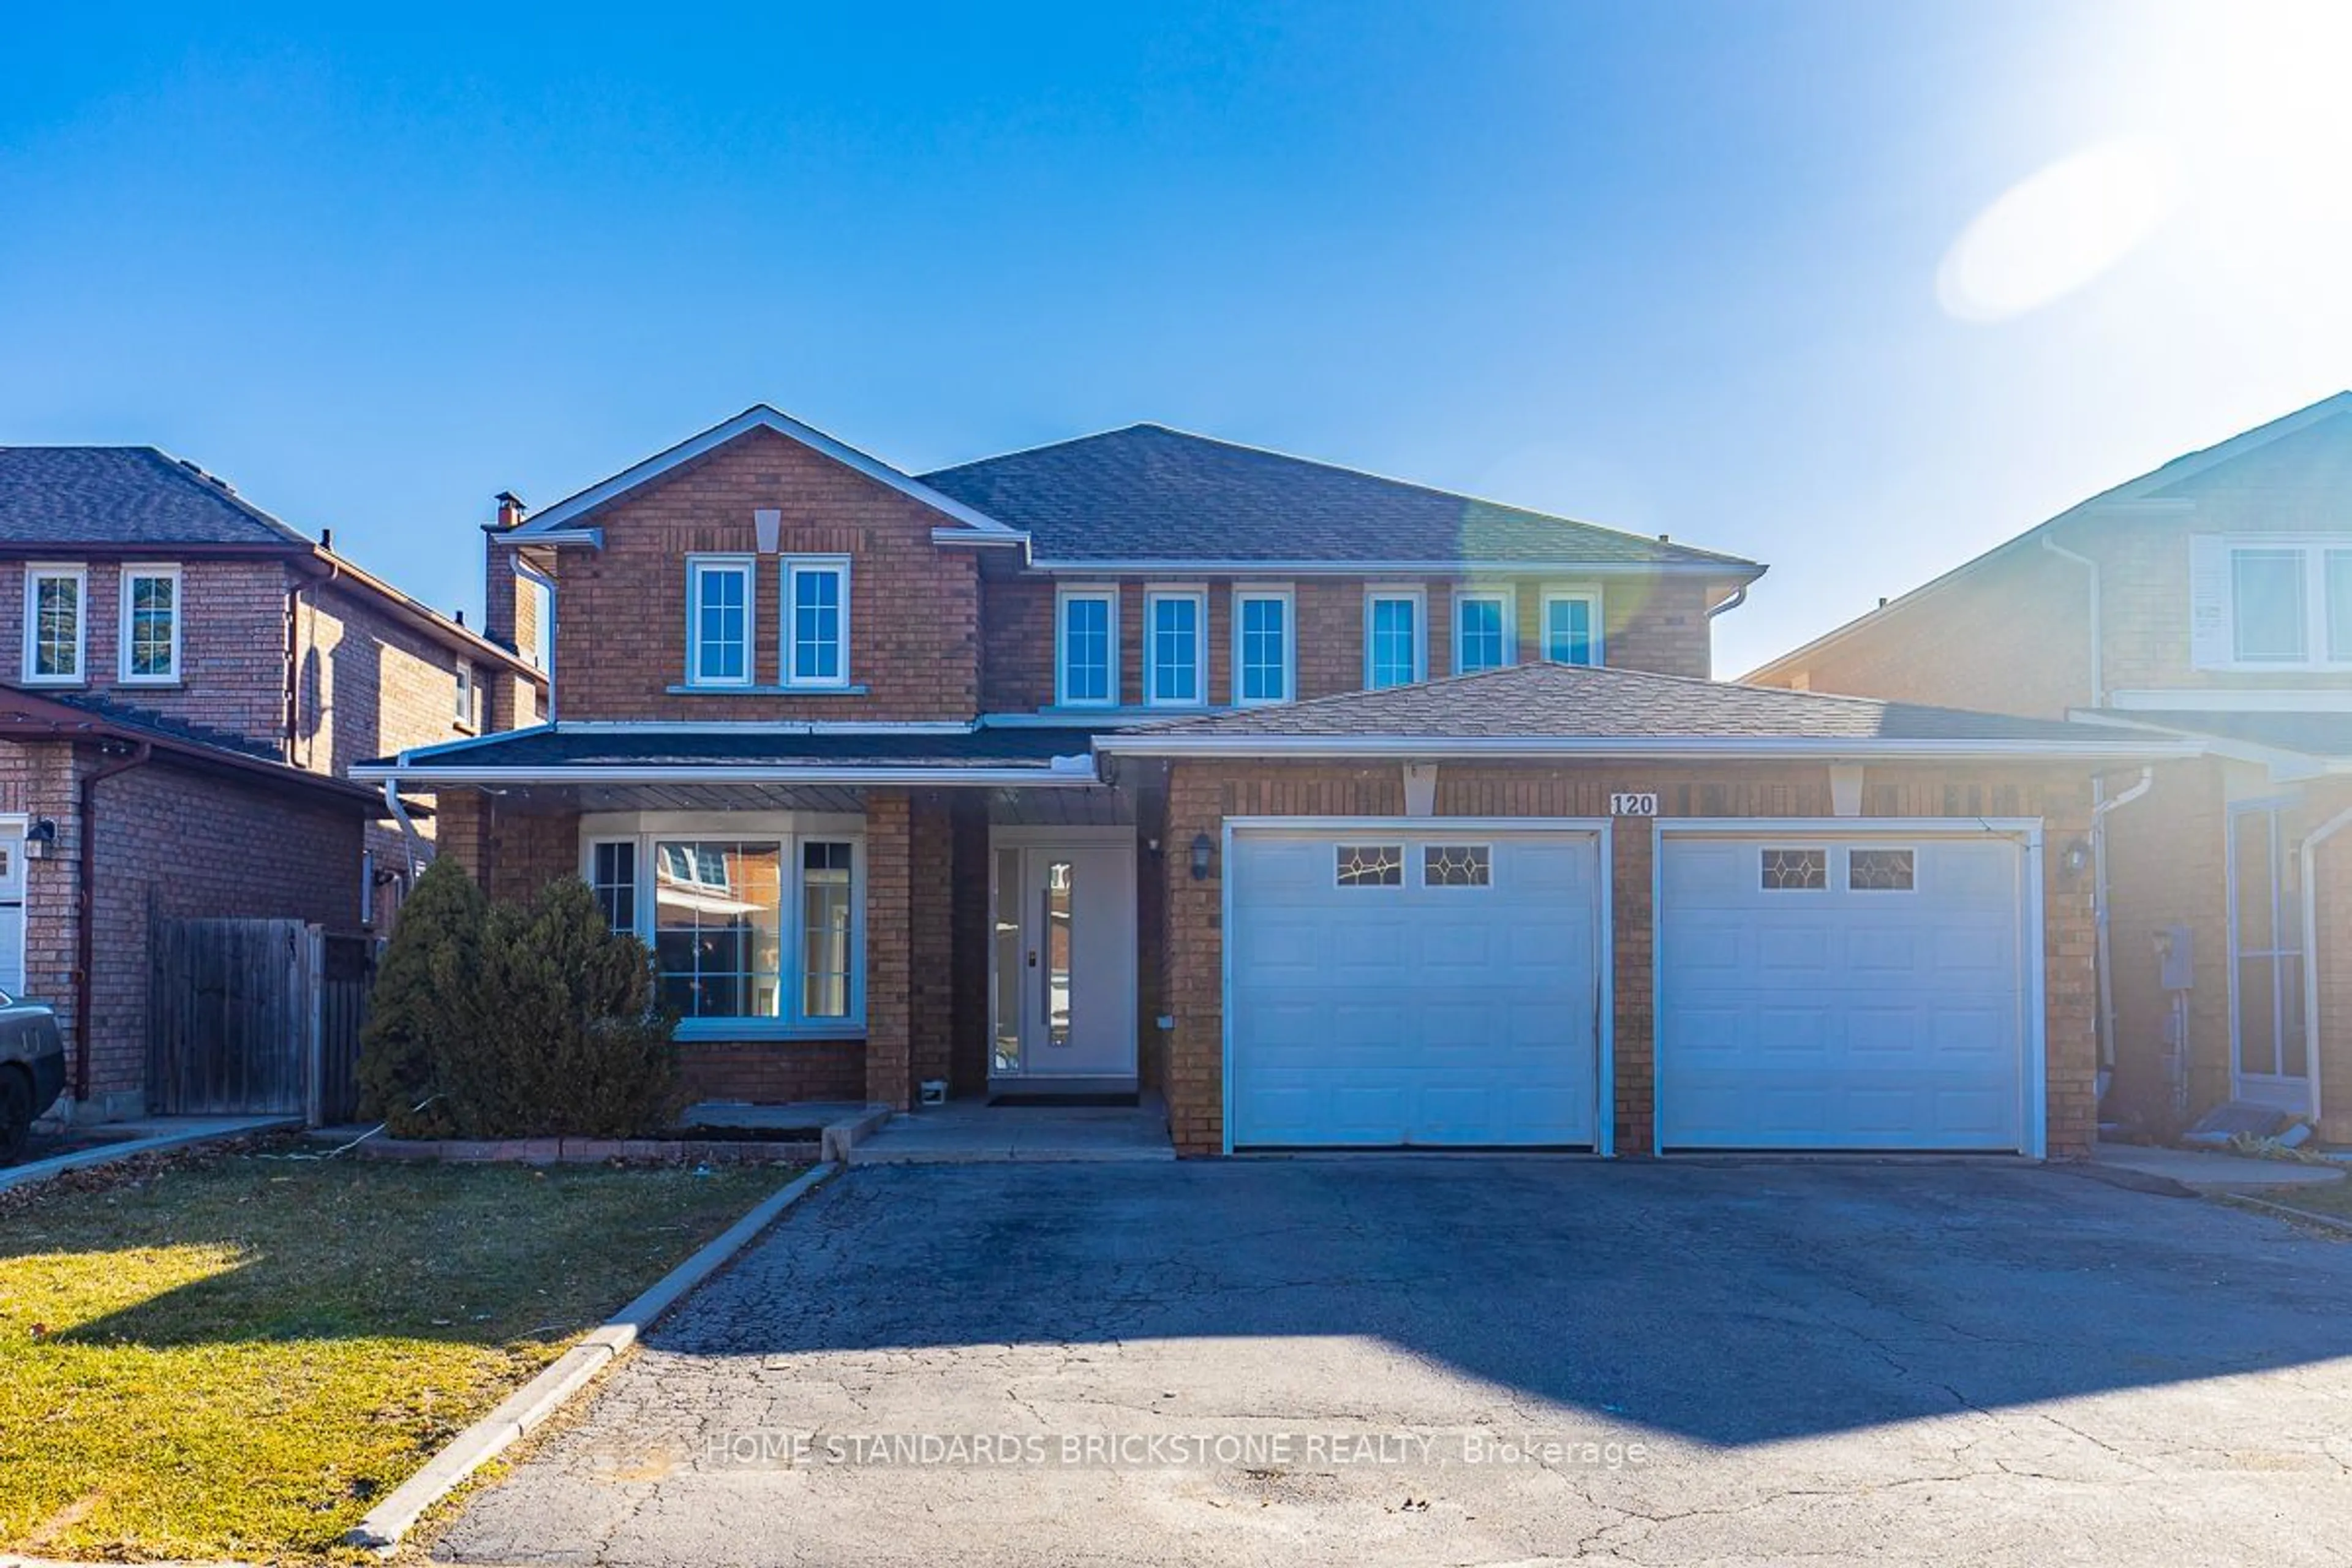 Home with brick exterior material for 120 Castlehill Rd, Vaughan Ontario L6A 1N7